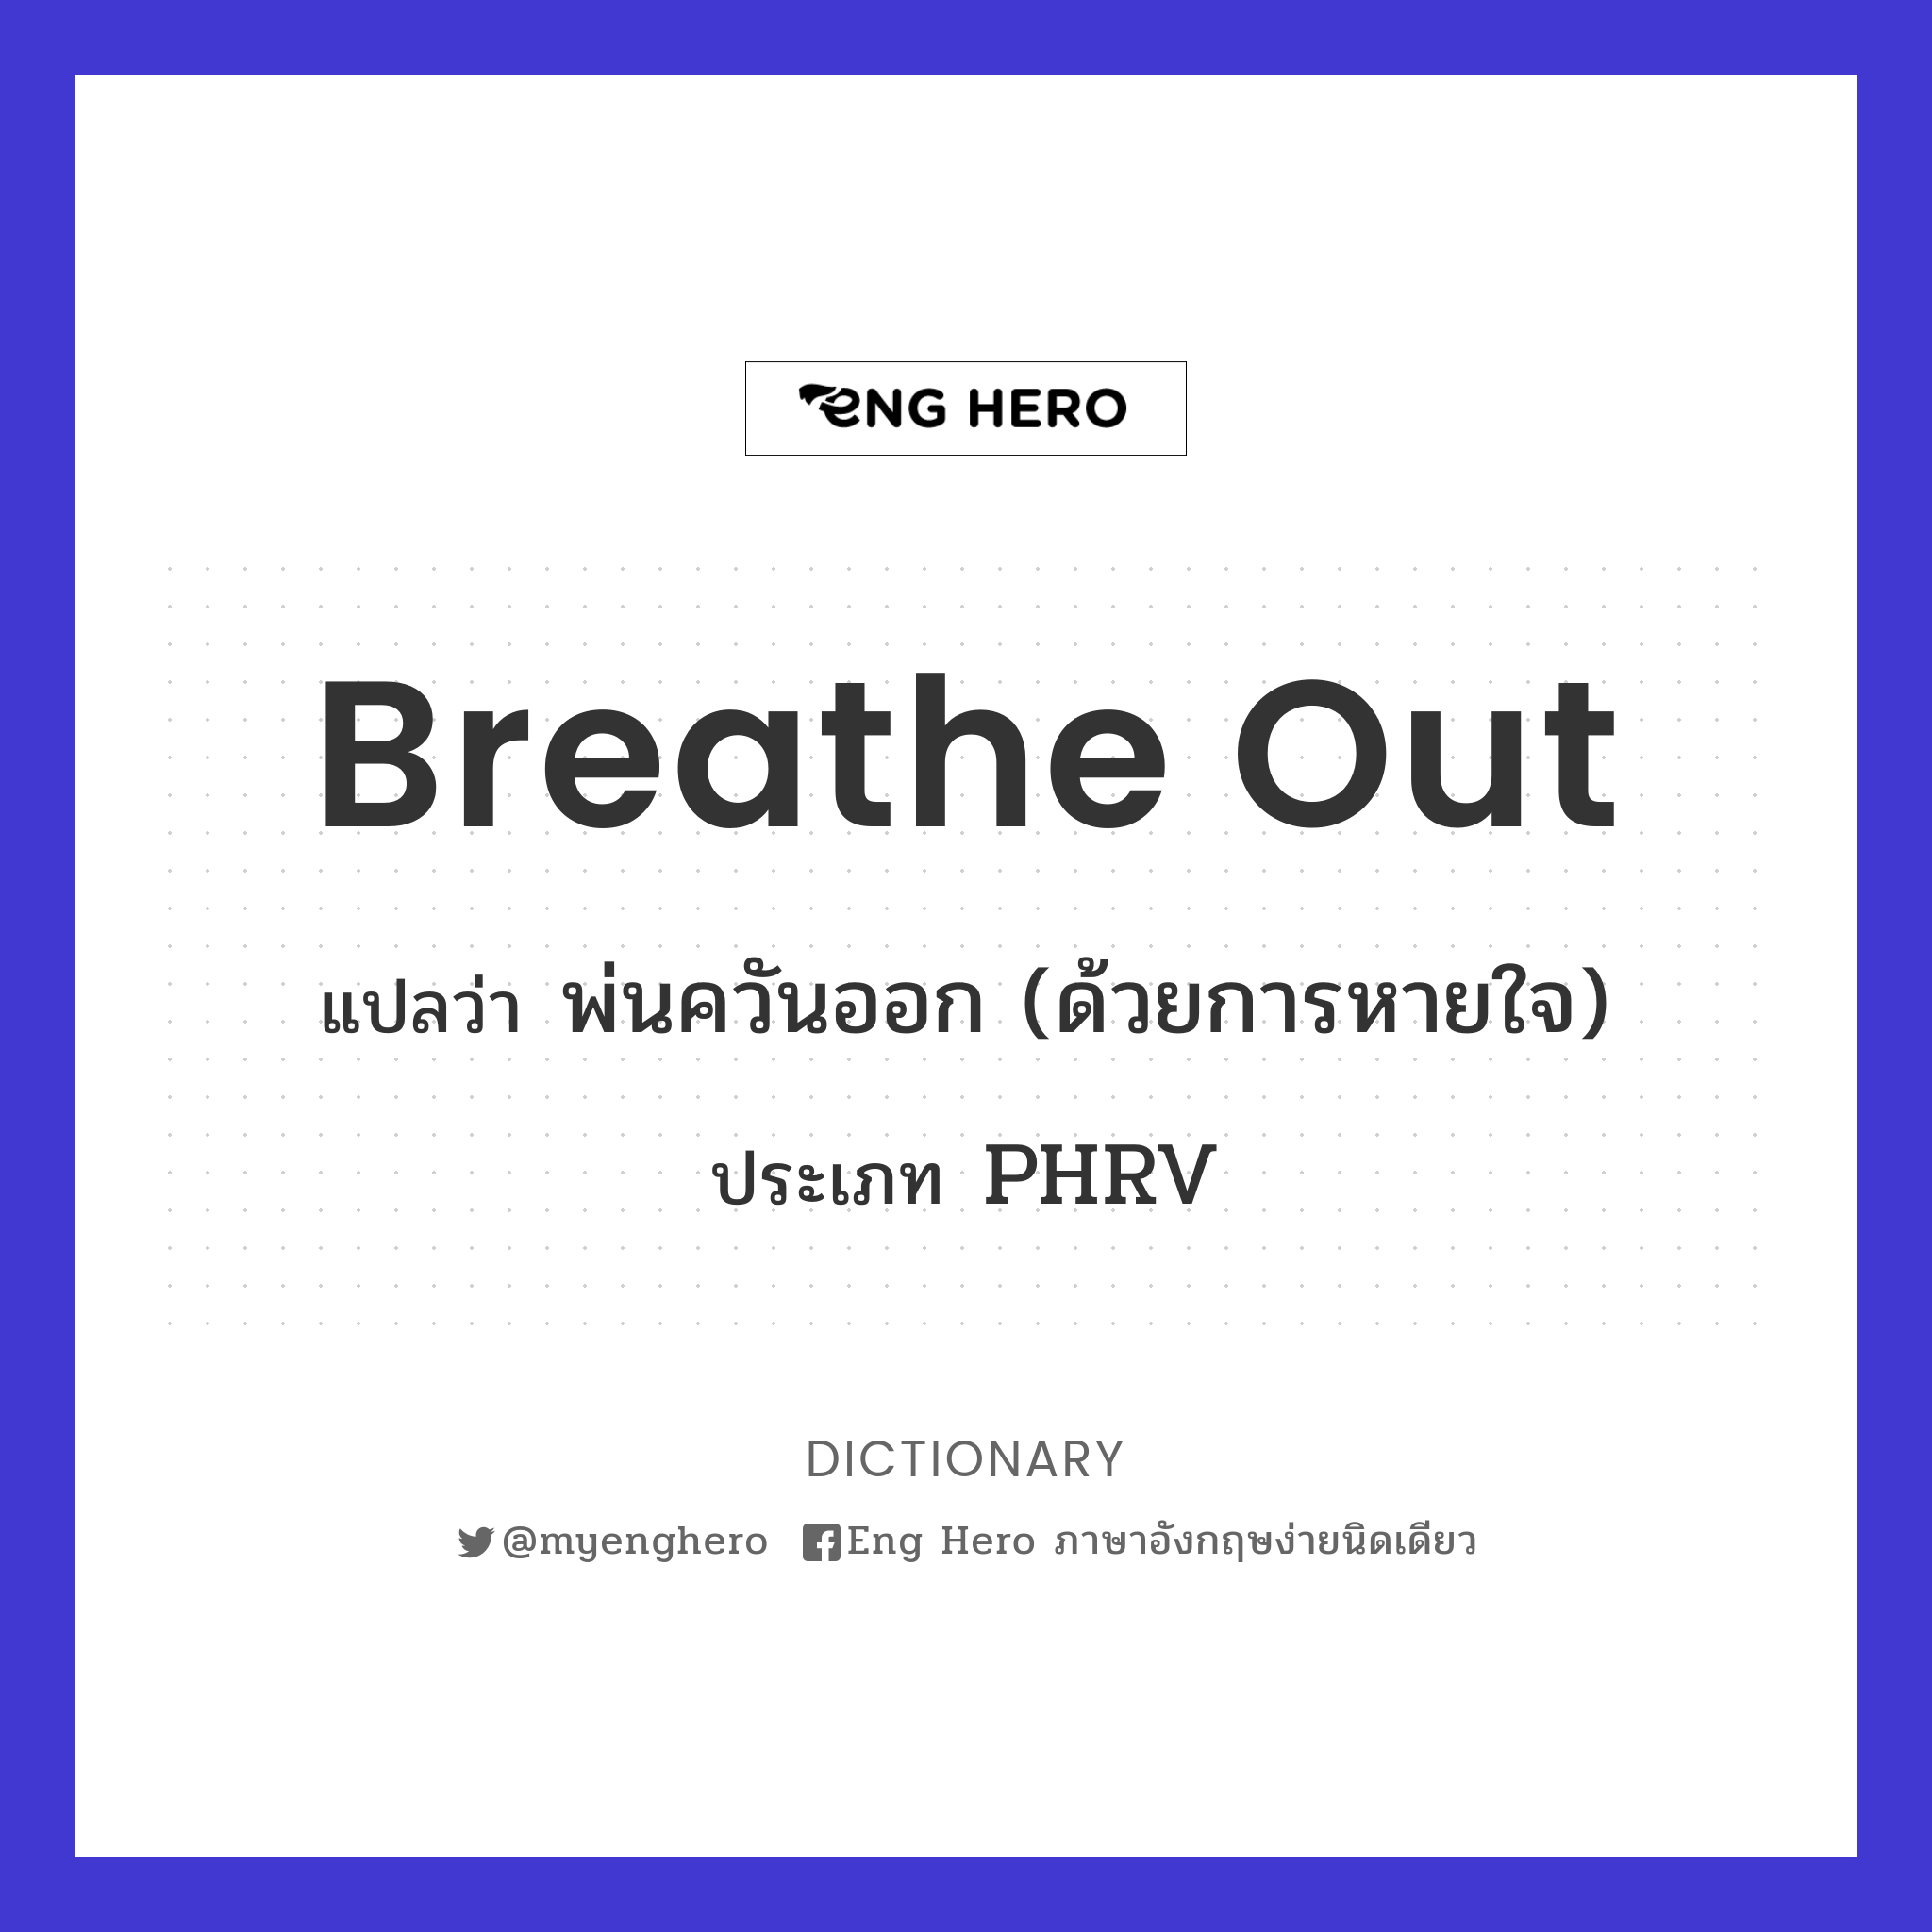 breathe out